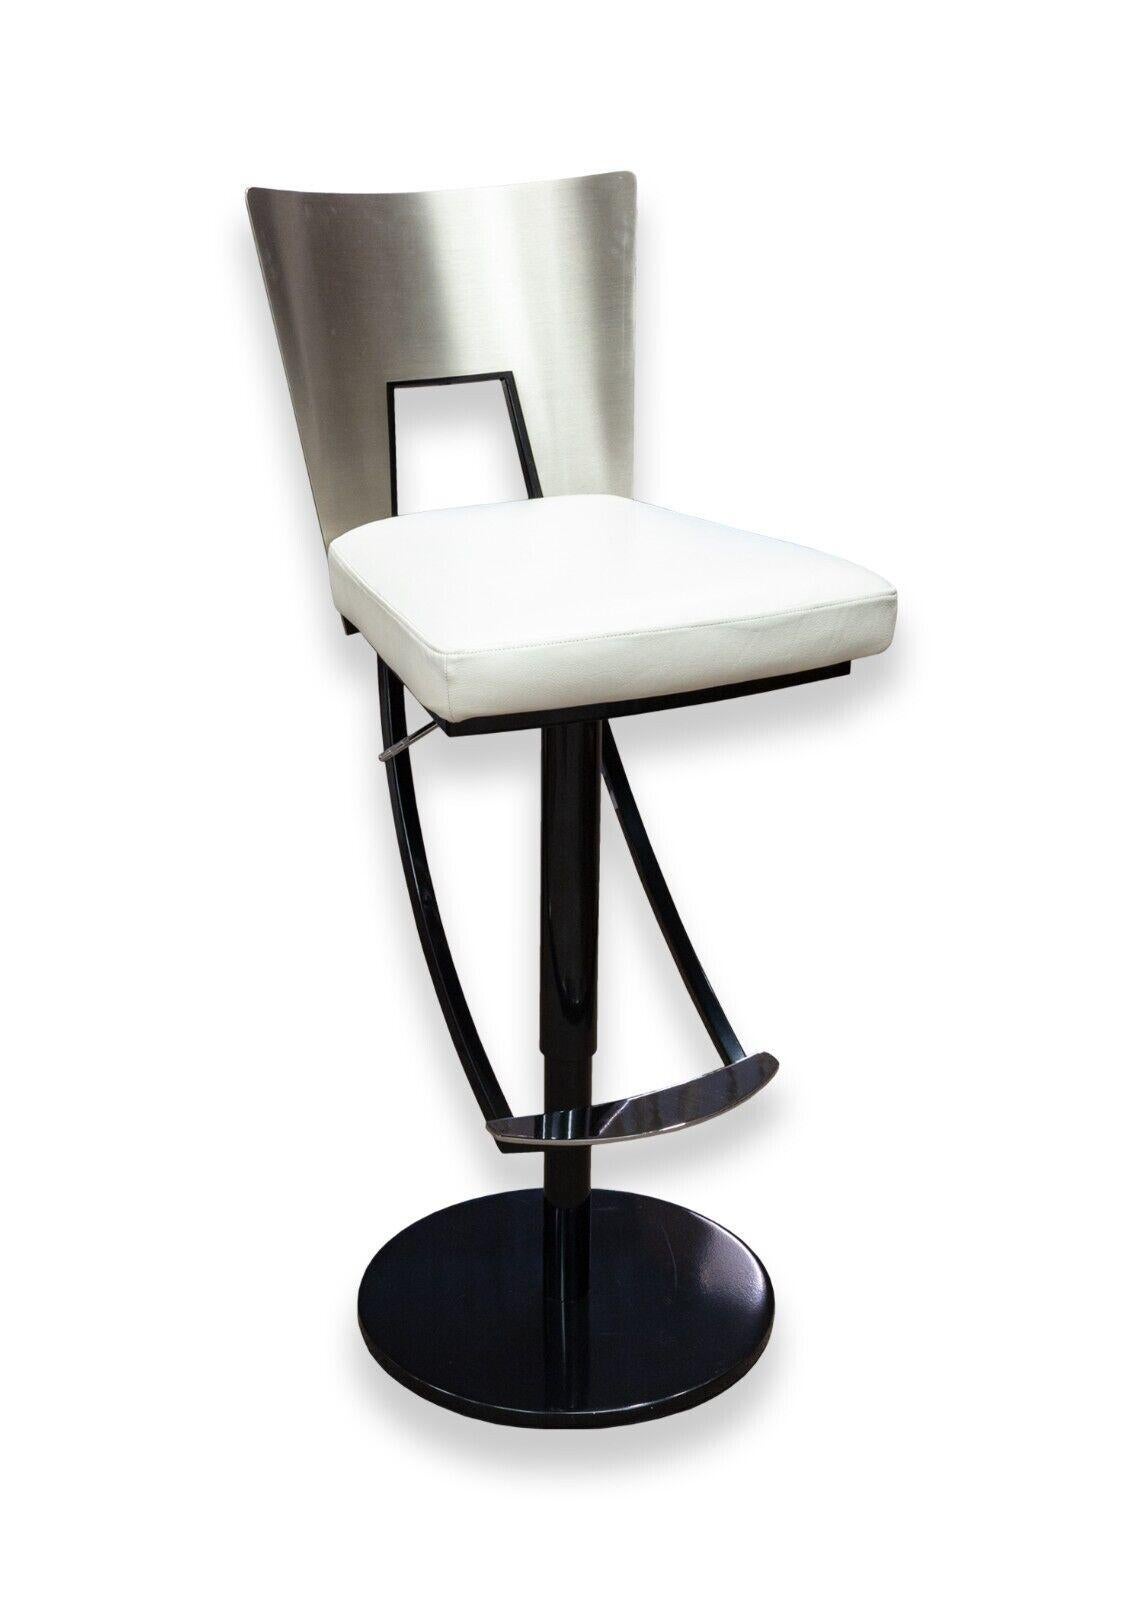 A contemporary modern pair of Elite Modern black and white barstools. A delightful set of barstools from Elite Modern. These two bar stools feature a full metal construction with black and brushed steel elements, white leather cushions, swiveling